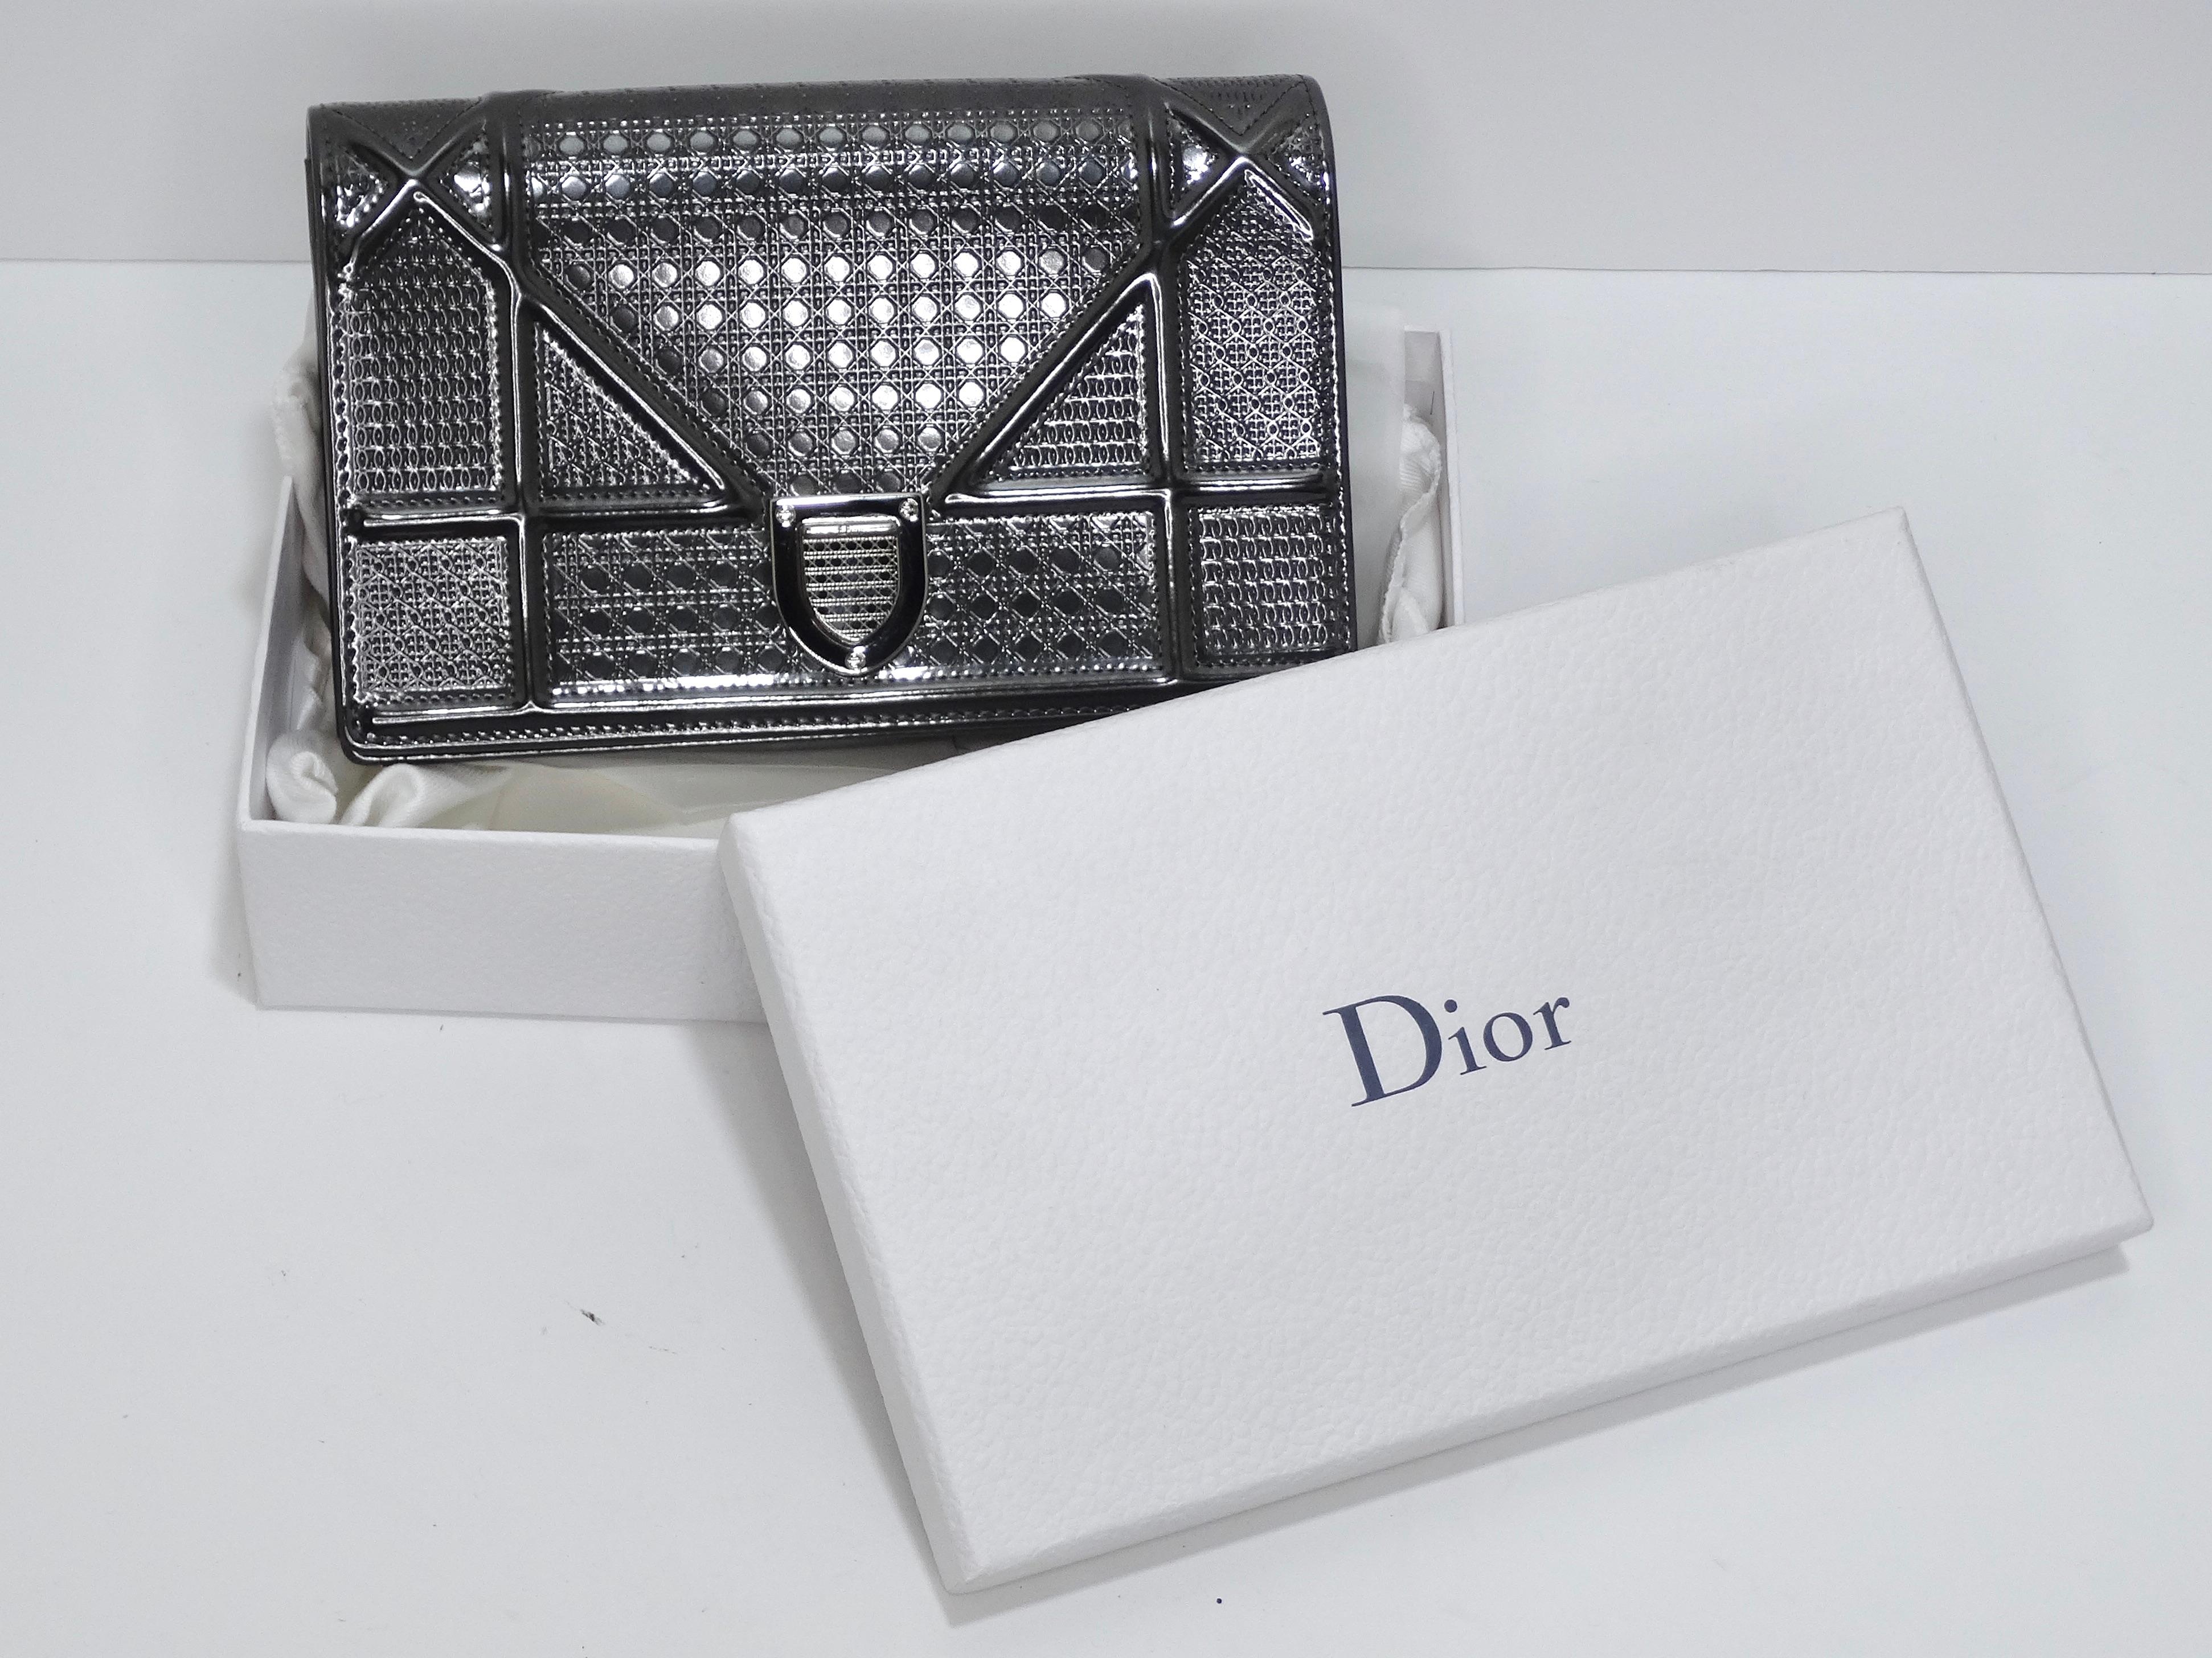 Feel modern and confident in this beautifully vibrant Dior handbag! This is a bold new line from the house of Dior debuted in 2019 that takes their classic handbags and puts a futuristic spin on them. This bag proves that Dior is for the new modern